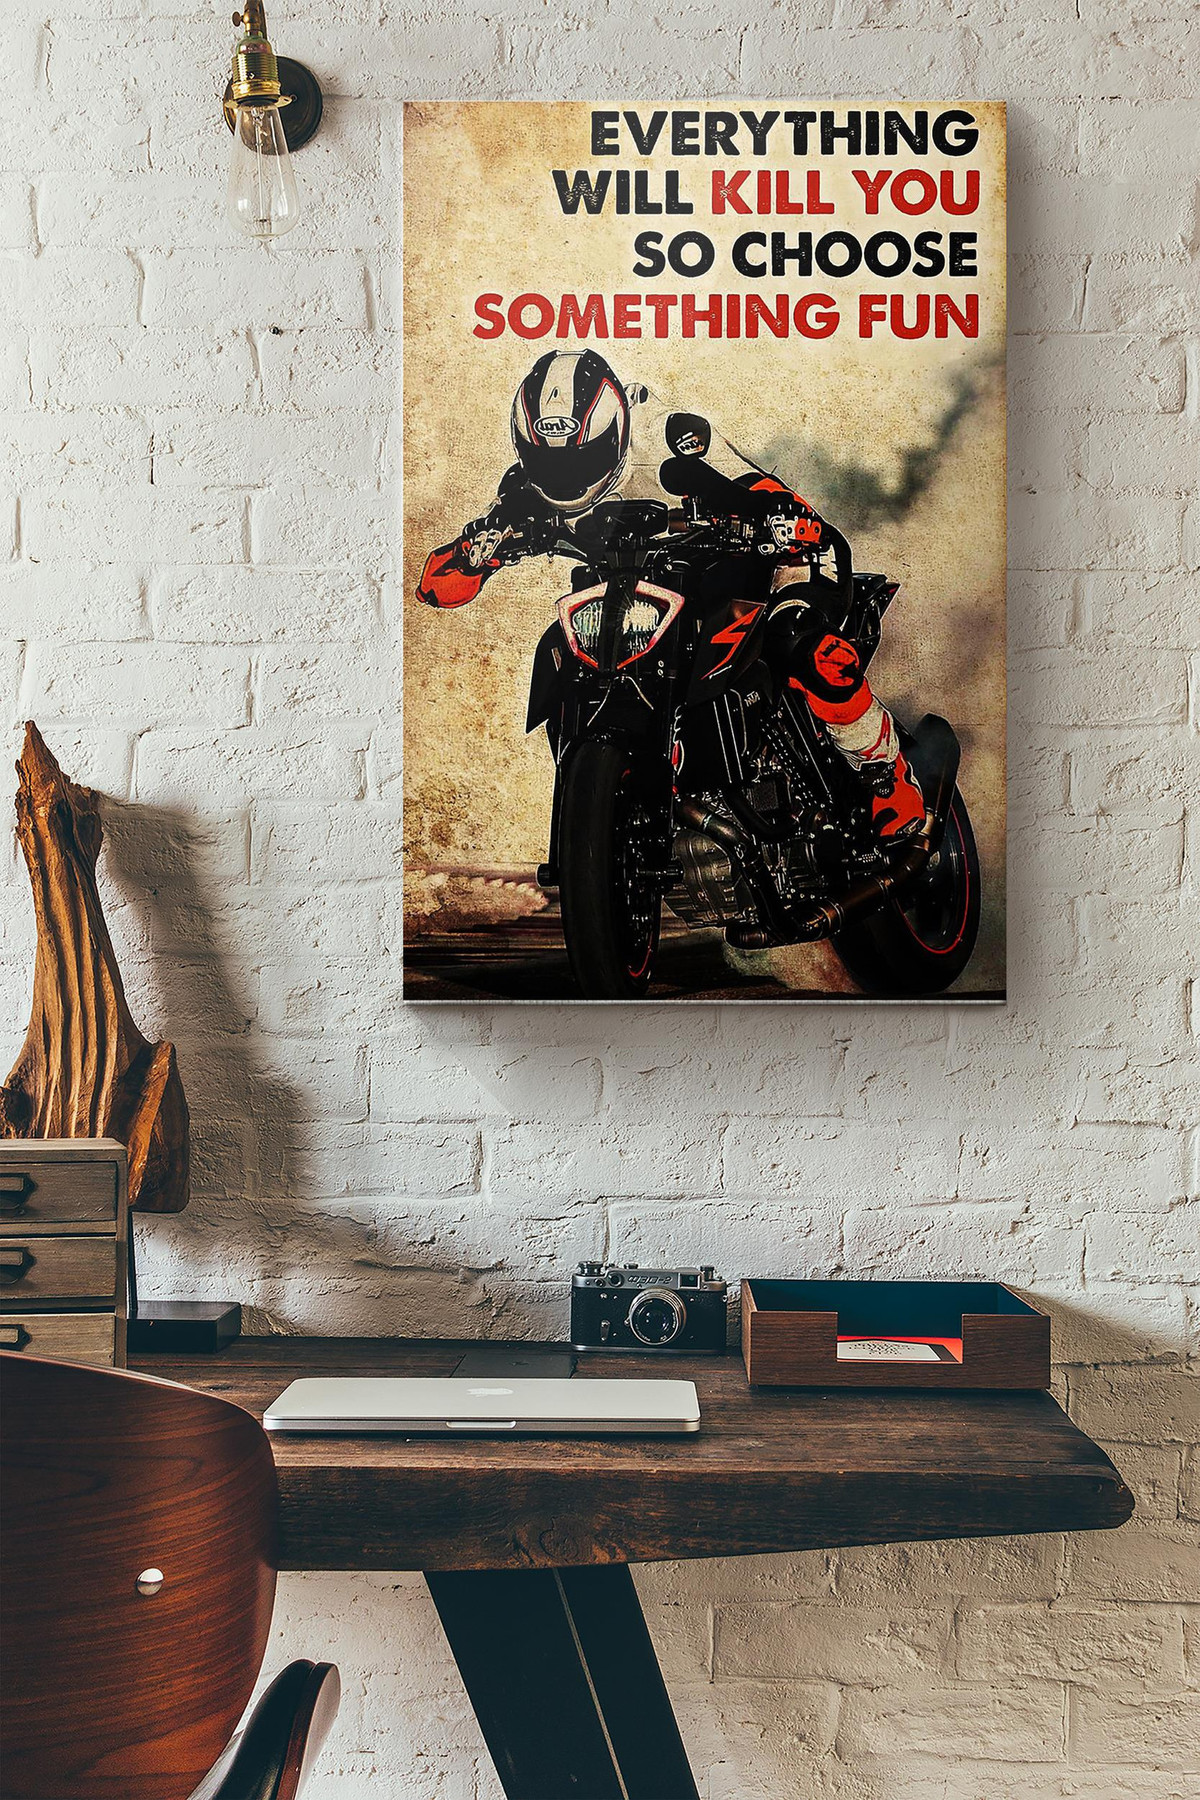 Motorbike Racing Everything Will Kill You So Choose Something Fun Canvas Painting Ideas, Canvas Hanging Prints, Gift Idea Framed Prints, Canvas Paintings Wrapped Canvas 8x10